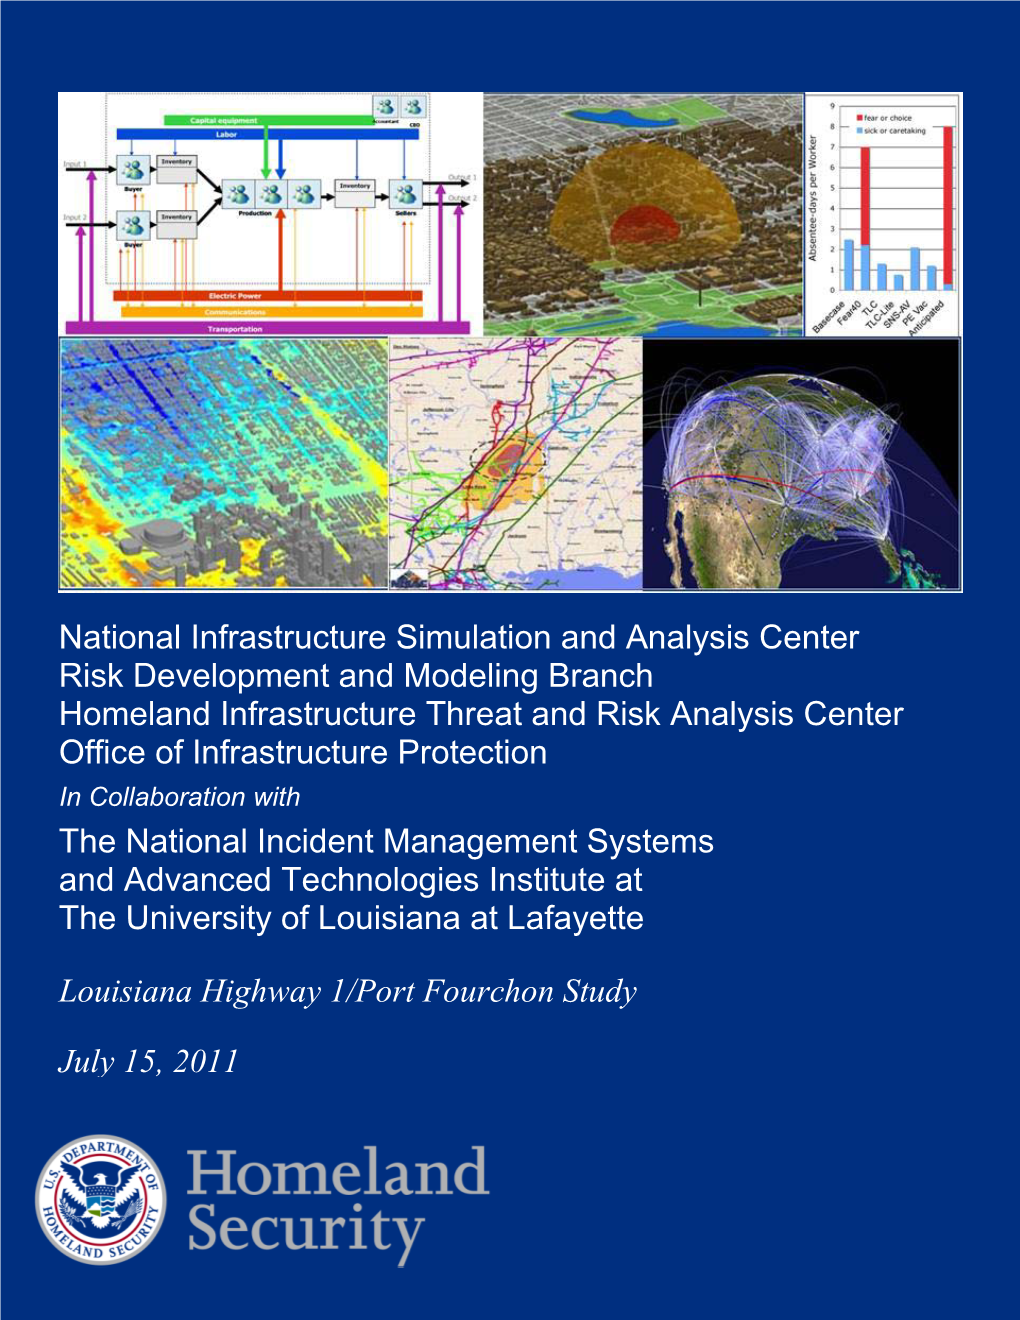 National Infrastructure Simulation and Analysis Center